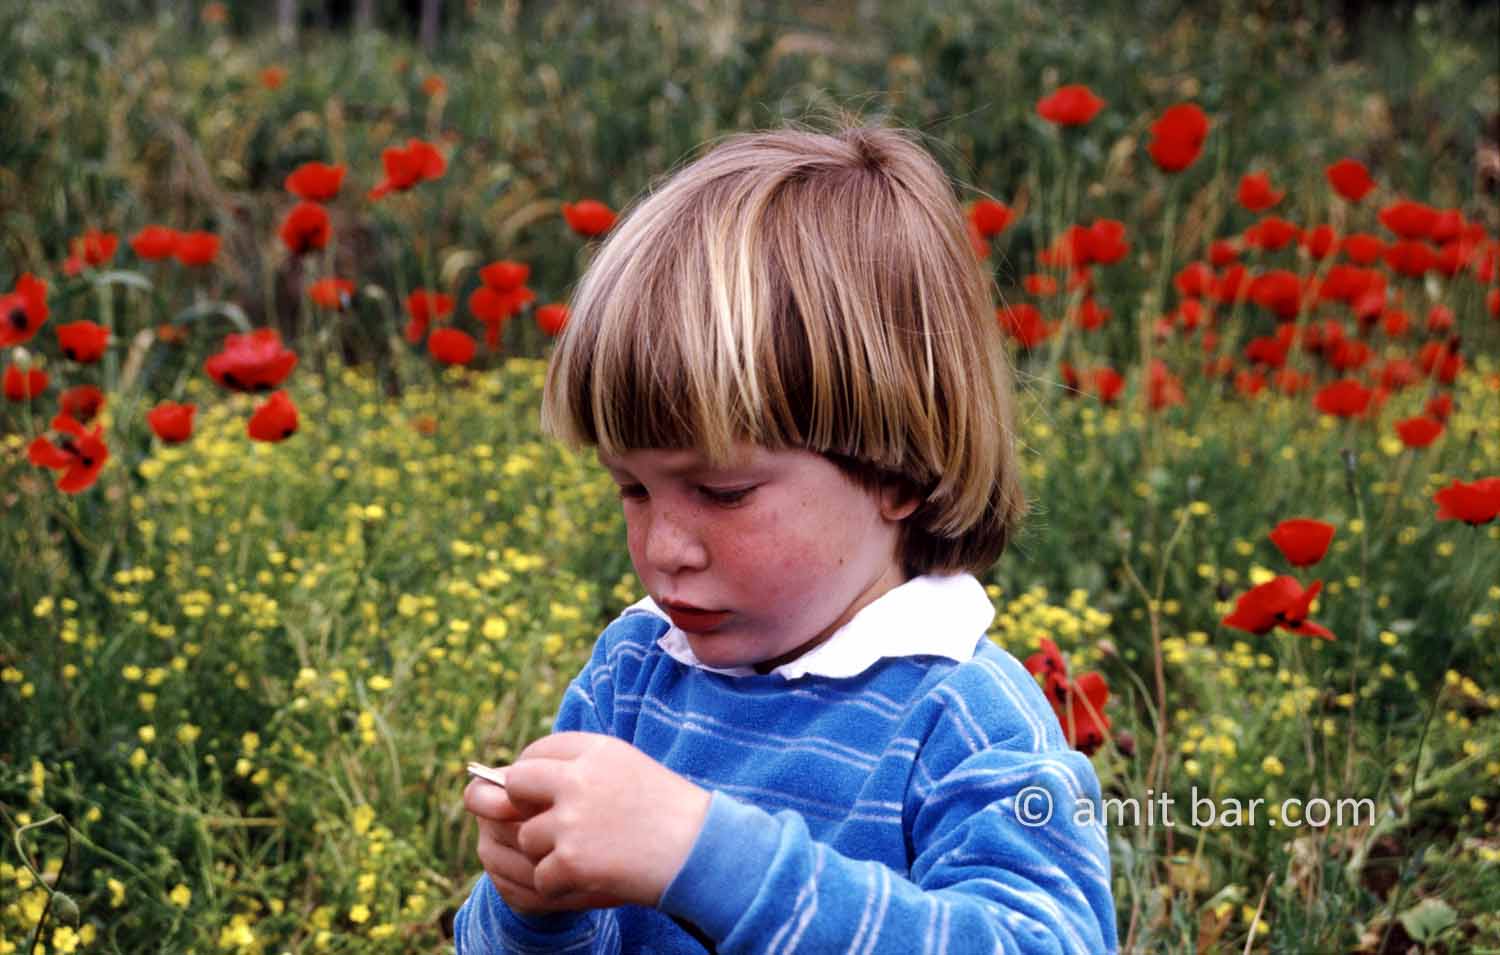 Boy with poppies: A boy in a field of poppies flowers